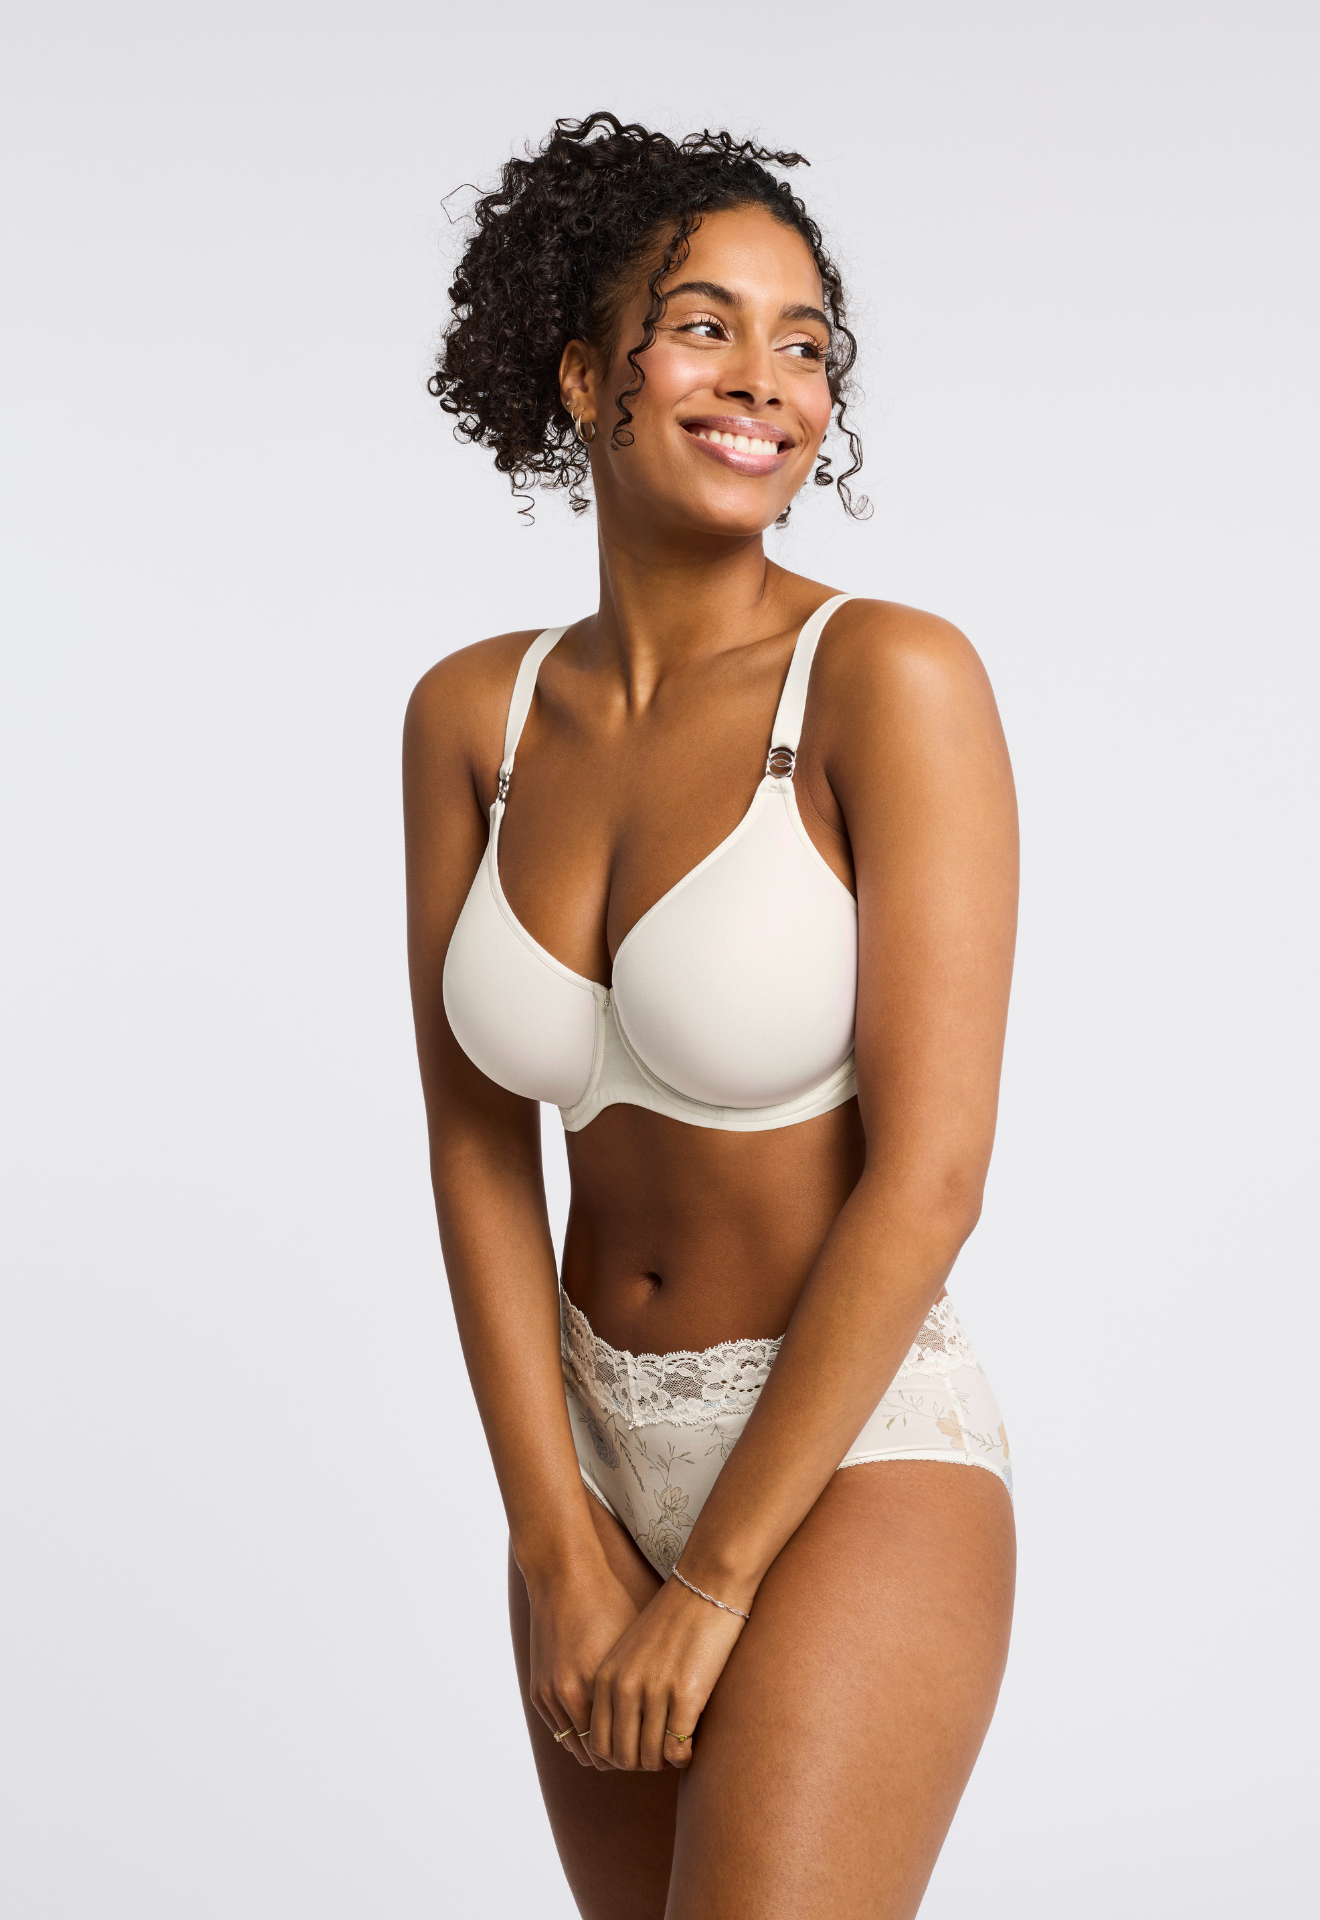 Sublime Spacer Bra - Chantilly worn by model front view